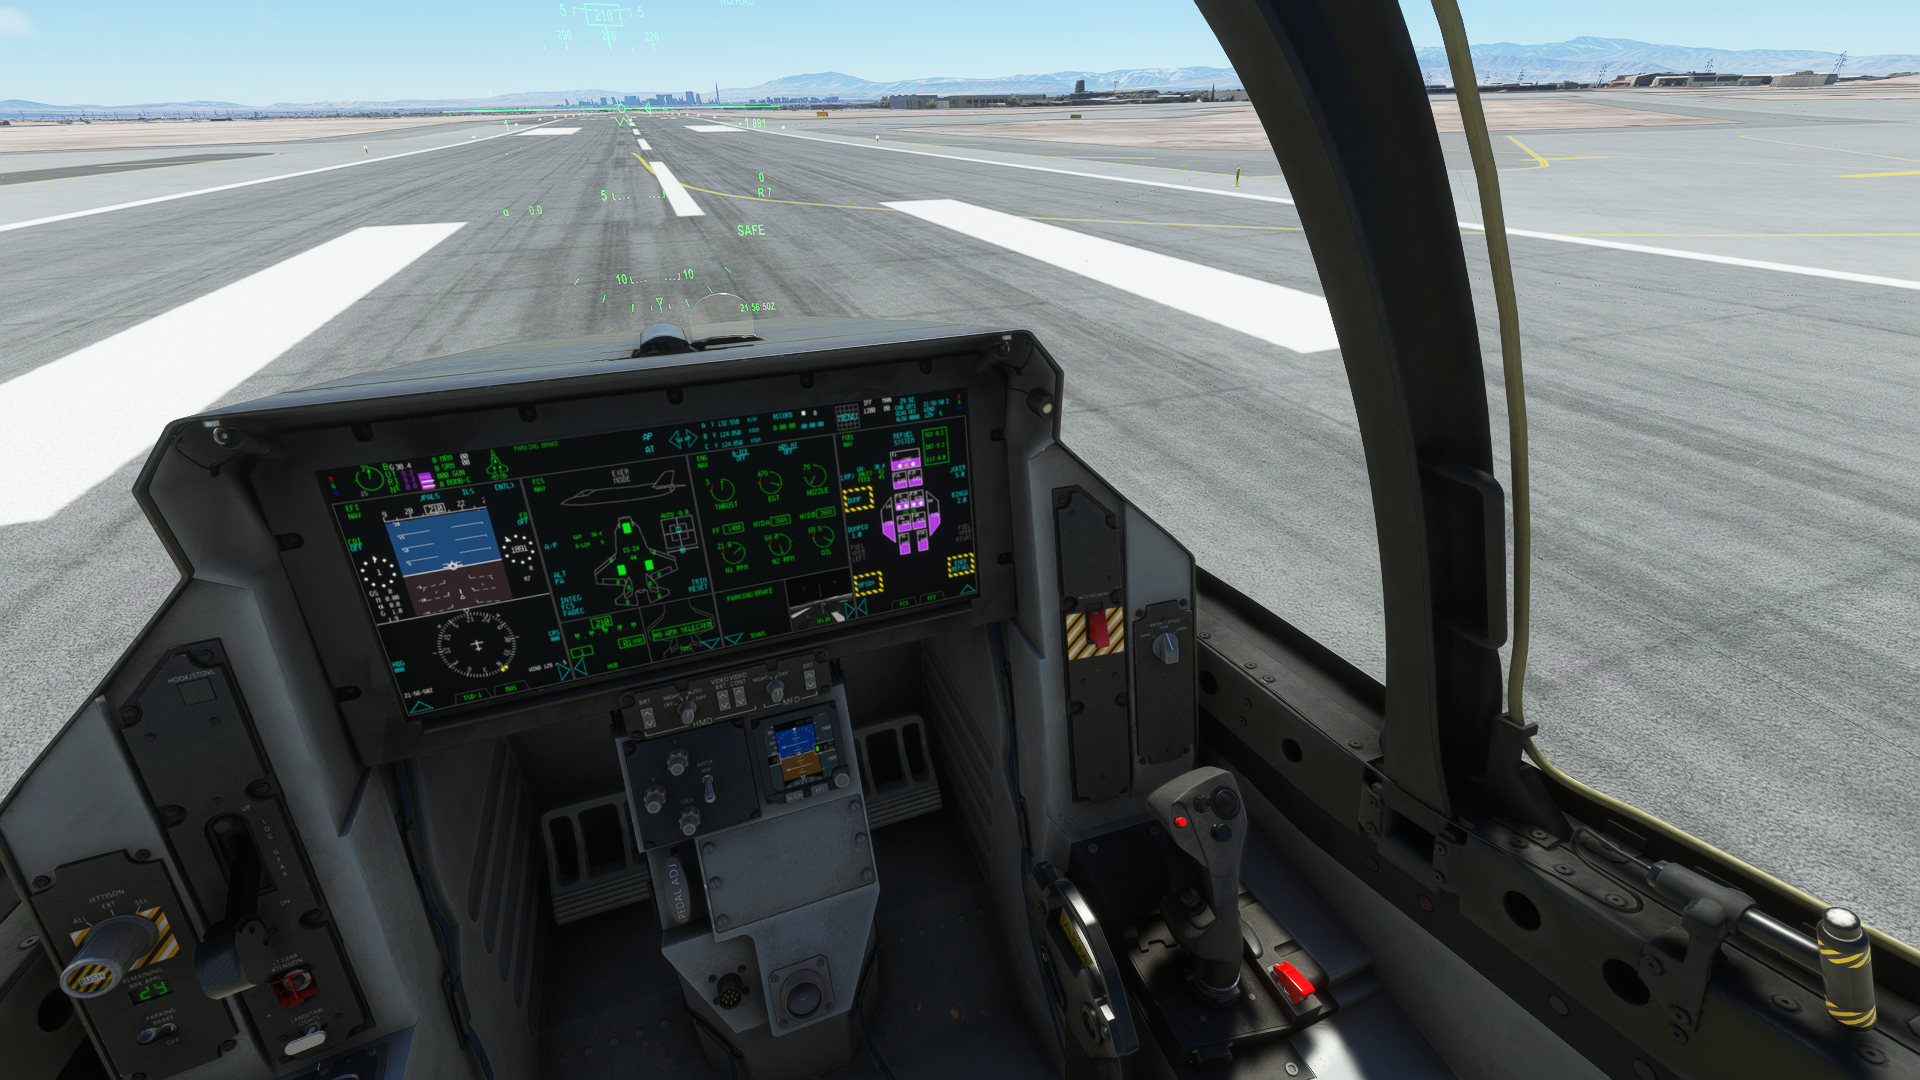 I Spent $250 on MSFS Military Jets So You Don't Have To - Editorial, Microsoft Flight Simulator